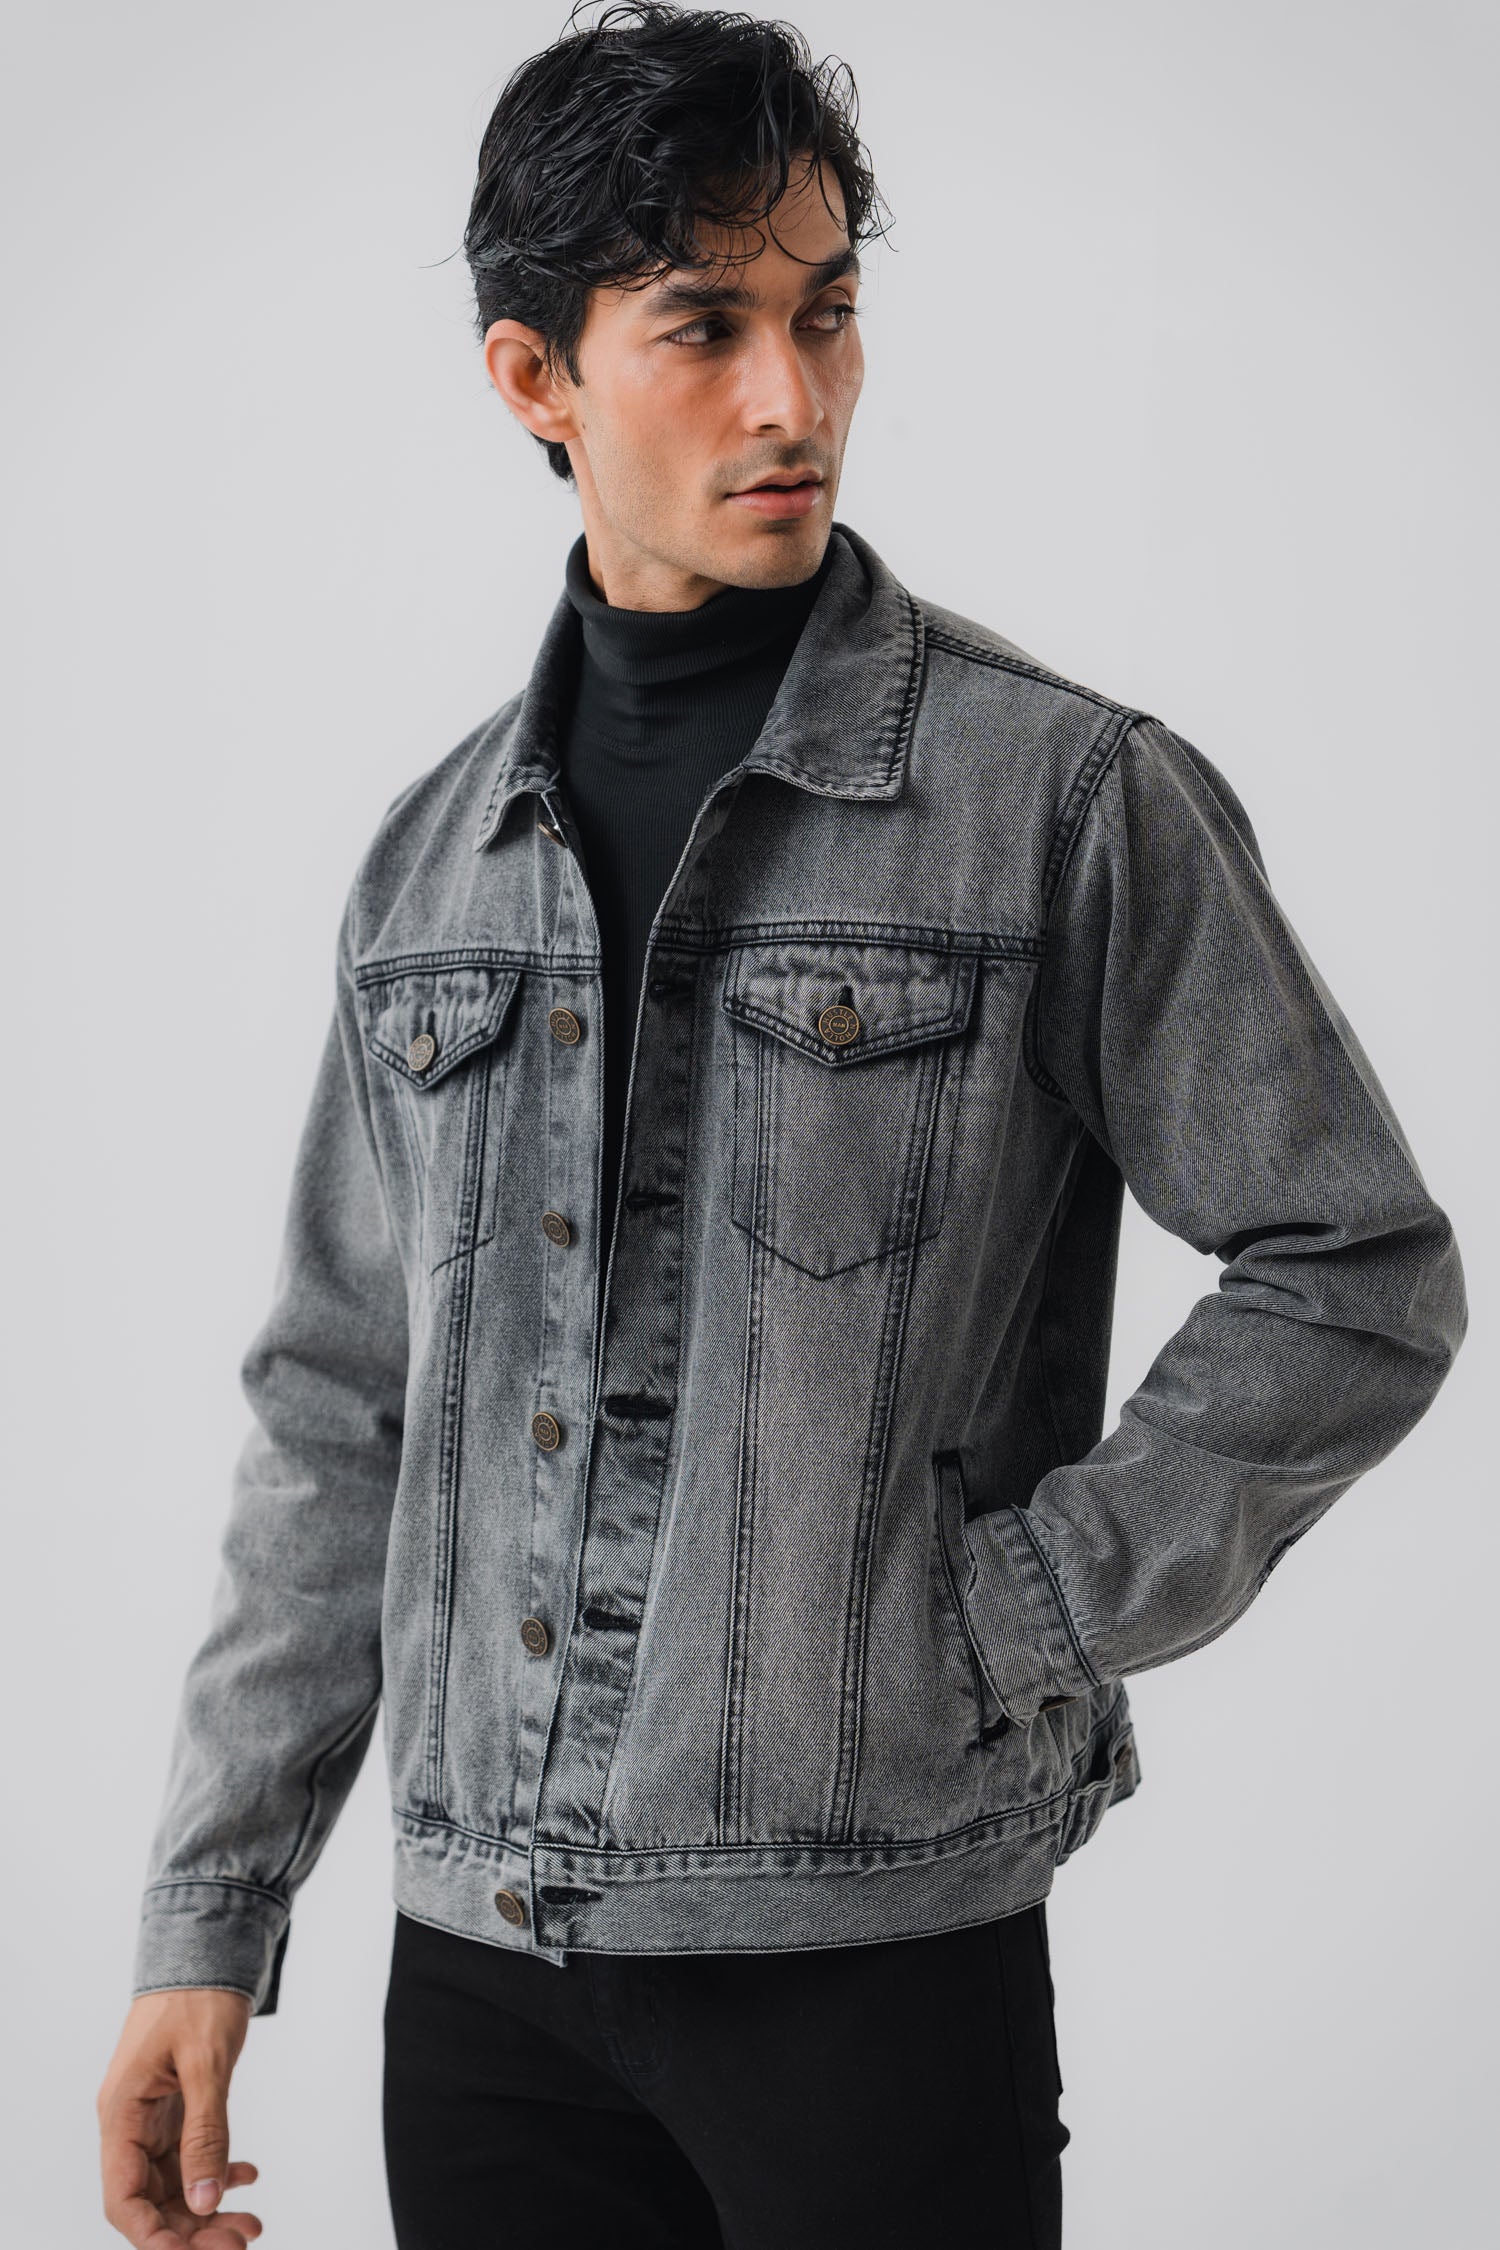 5 Denim Jackets To Enhance Your Personality | Denim jacket men outfit, Fall  outfits men, Mens fashion casual outfits